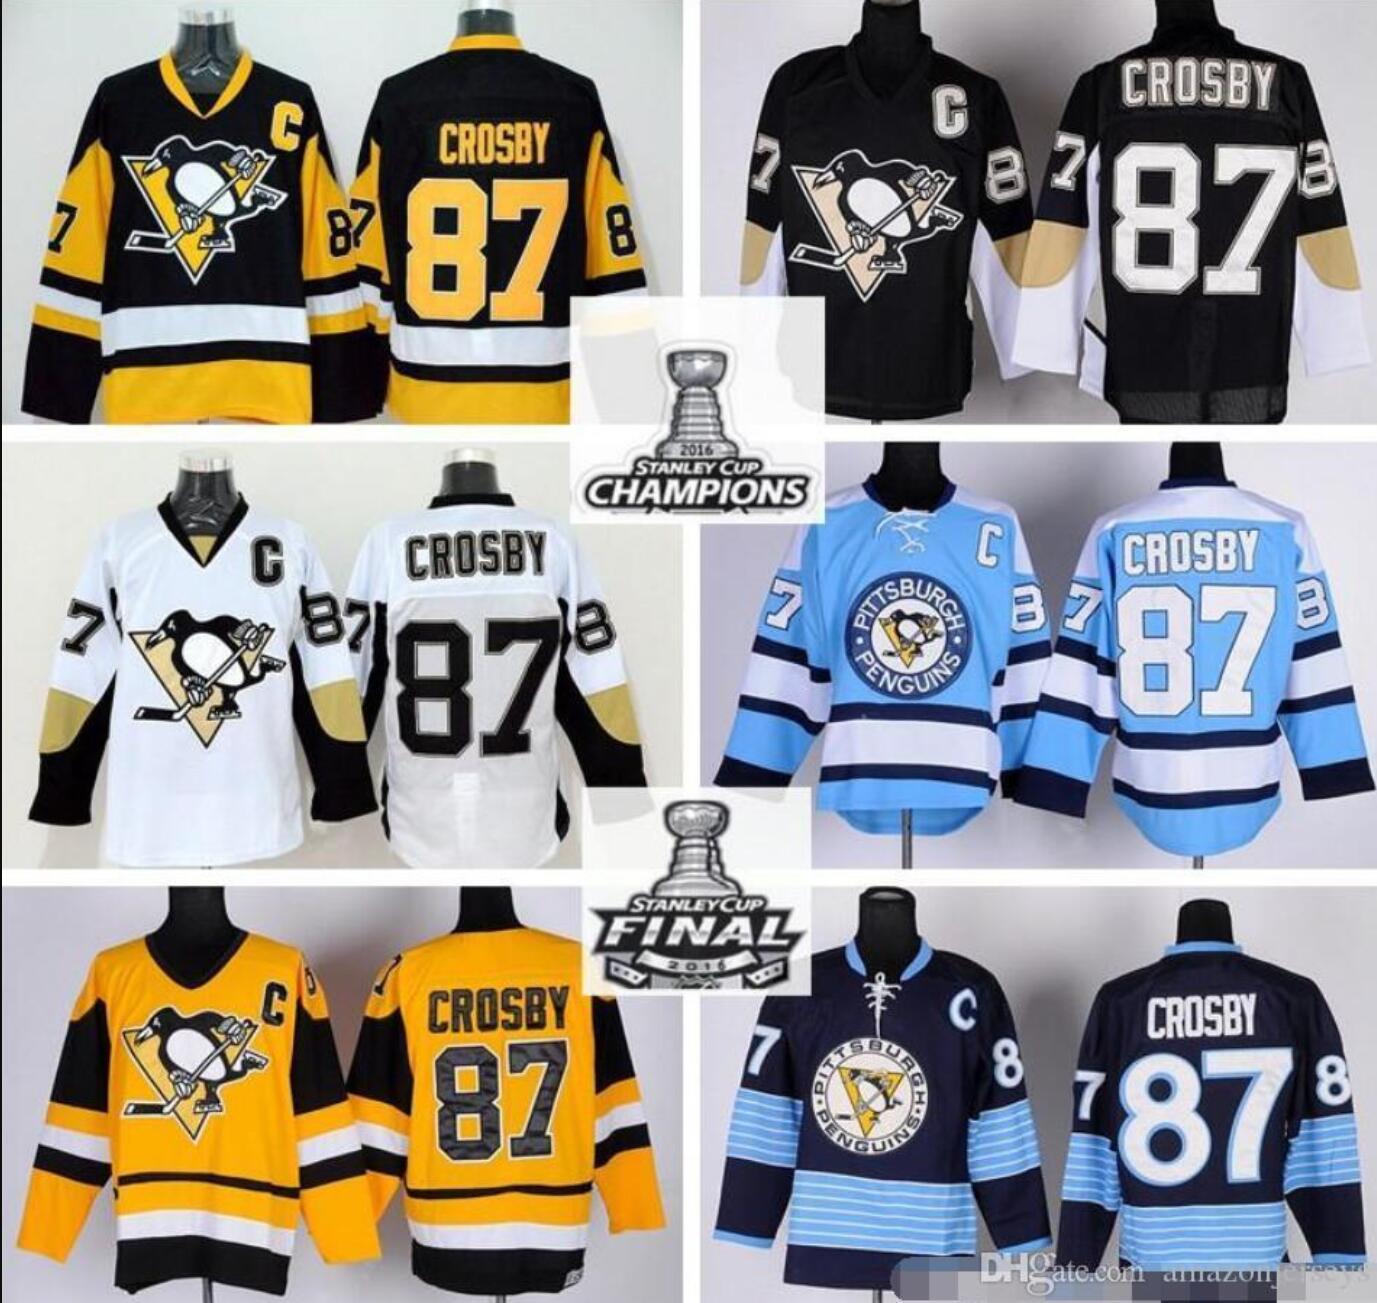 pittsburgh penguins winter classic 2017 jersey